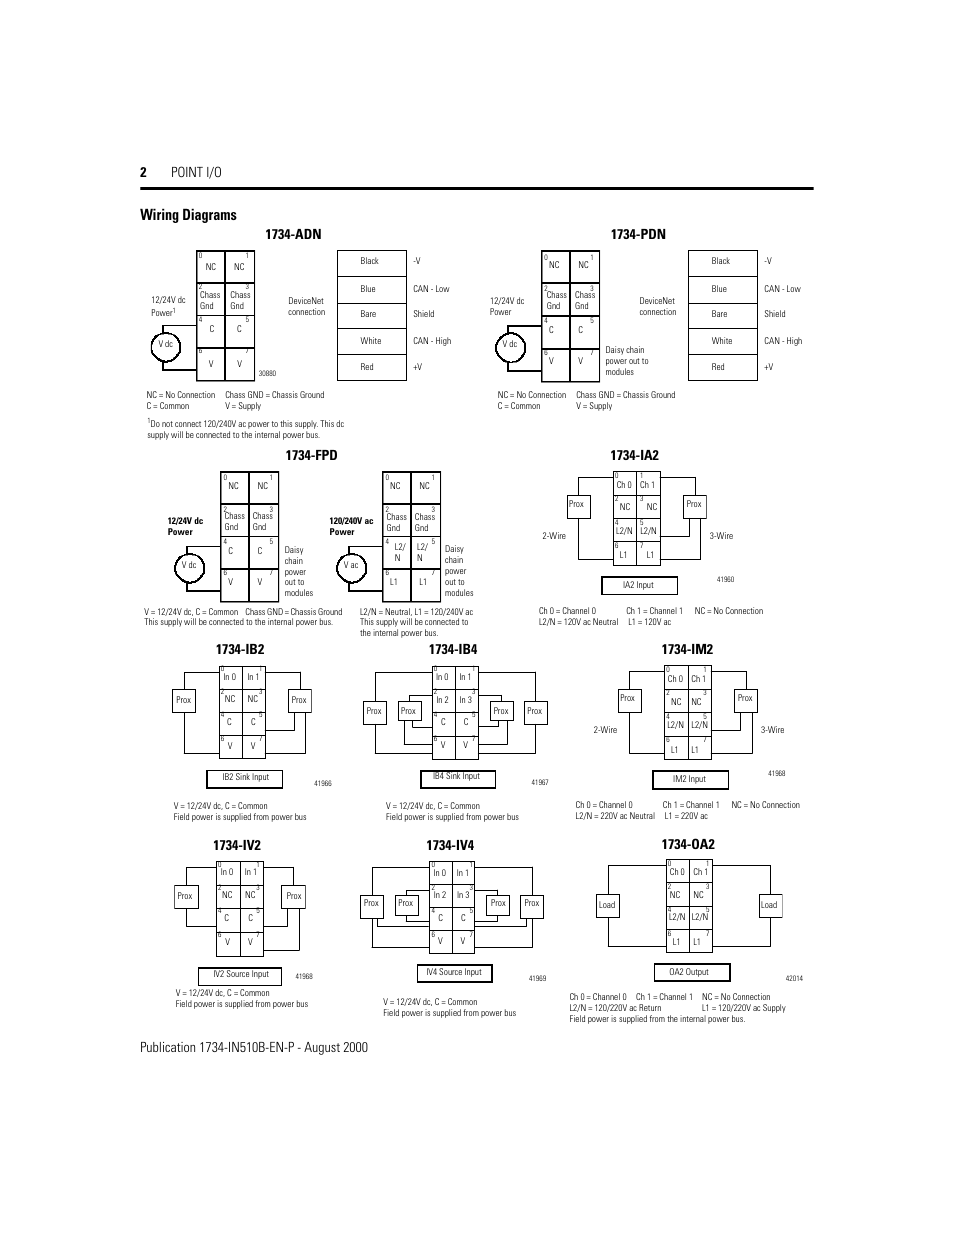 Wiring diagrams, 1734-pdn, 1734-fpd | Rockwell Automation 1734 Point I/O  Installation Instructions User Manual | Page 2 / 12  1734 Ib4 Wiring Diagram    Manuals Directory